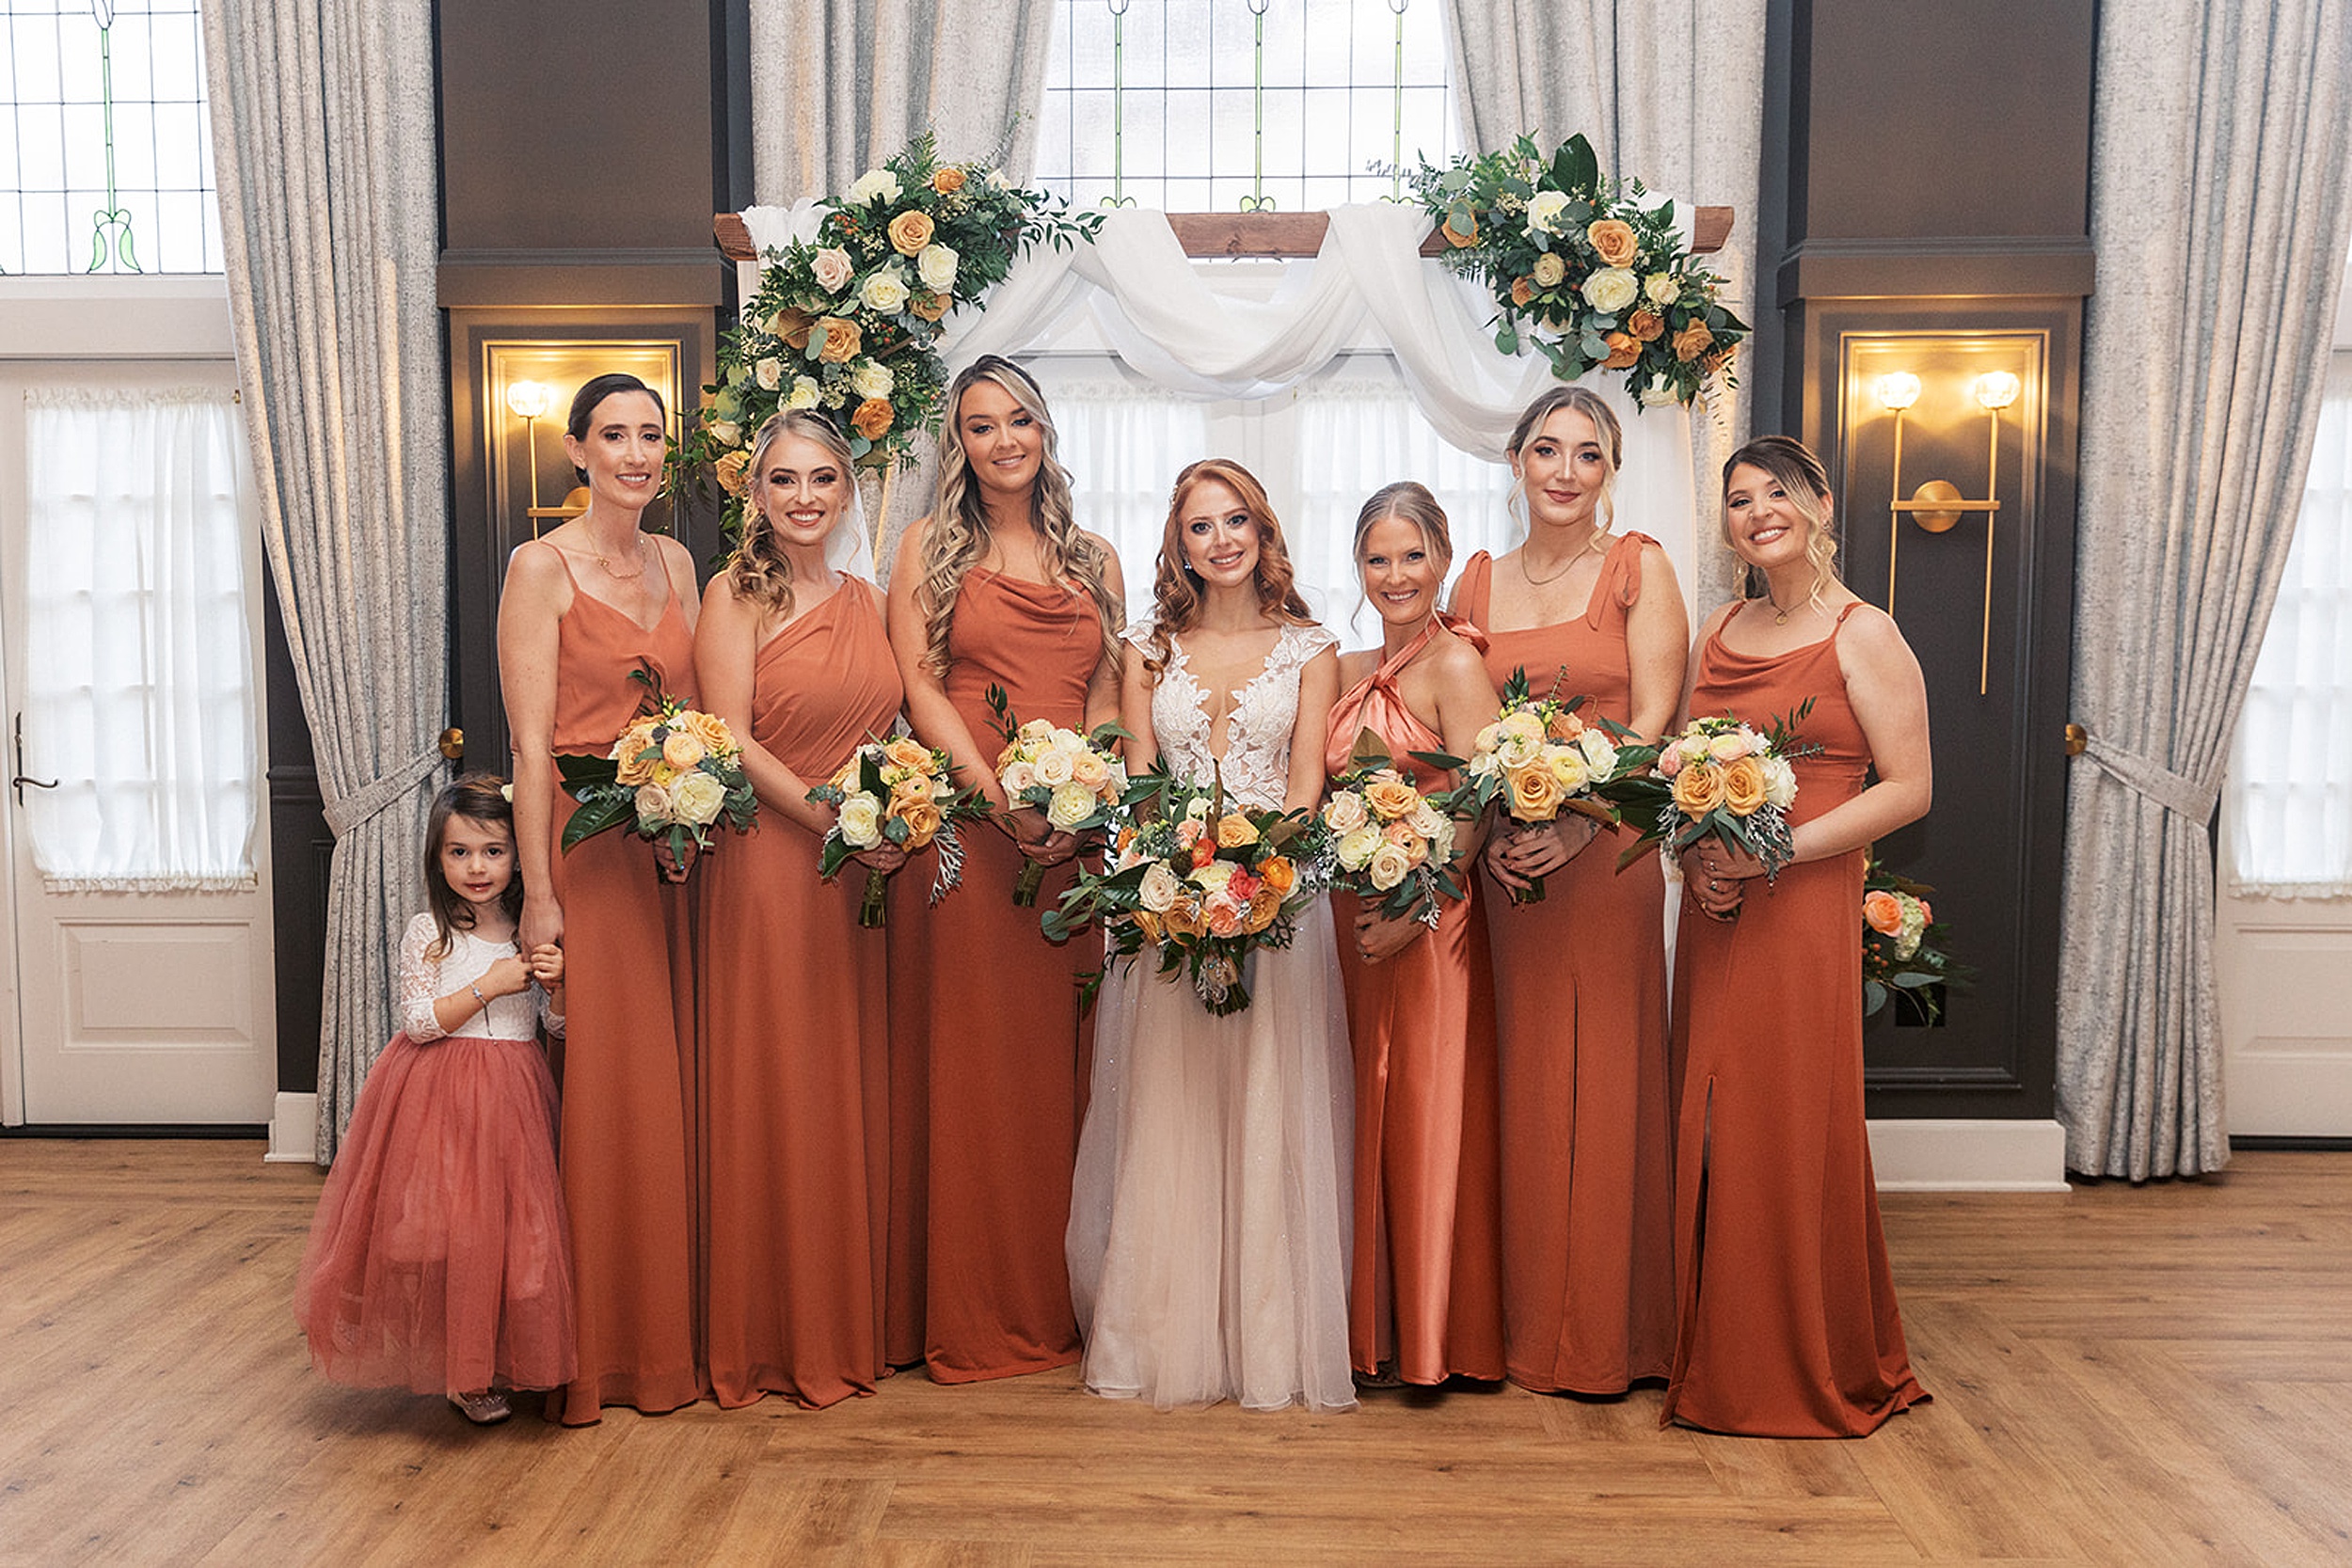 A bride stands under her ceremony arbor holding a bright bouquet with her bridesmaids and flower girl in matching orange dresses